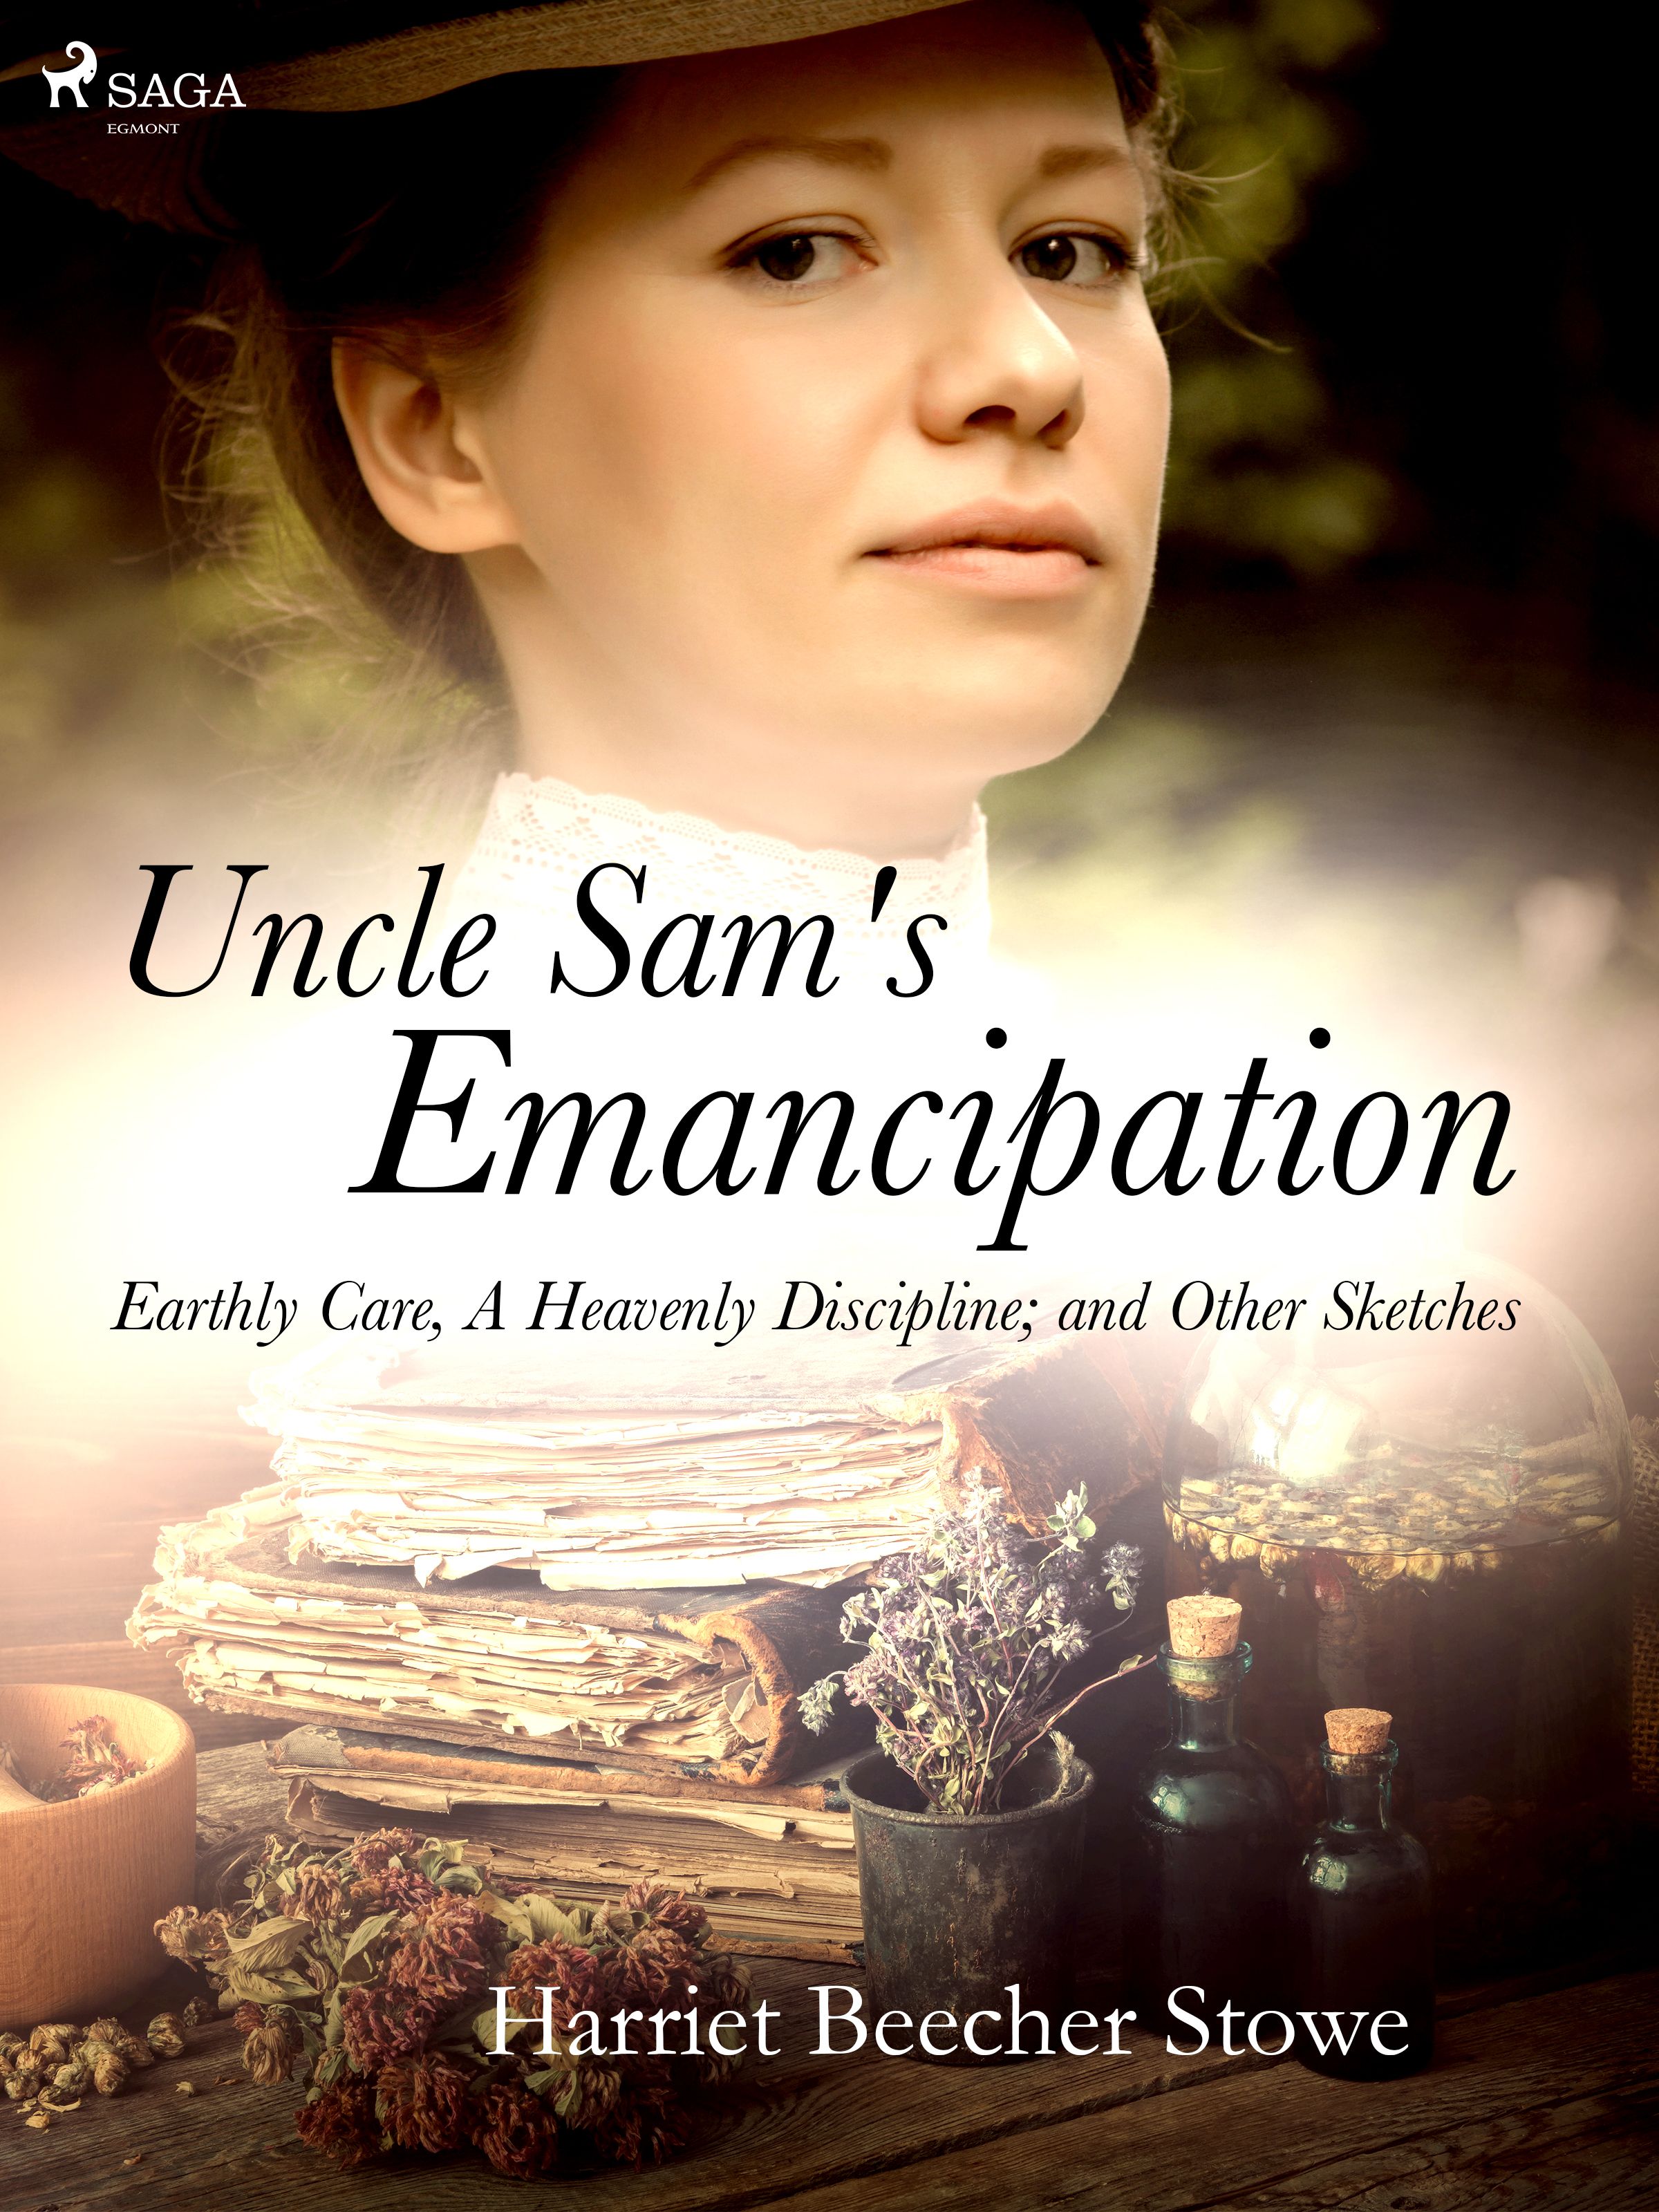 Uncle Sam's Emancipation; Earthly Care, A Heavenly Discipline; and Other Sketches, e-bog af Harriet Beecher-Stowe